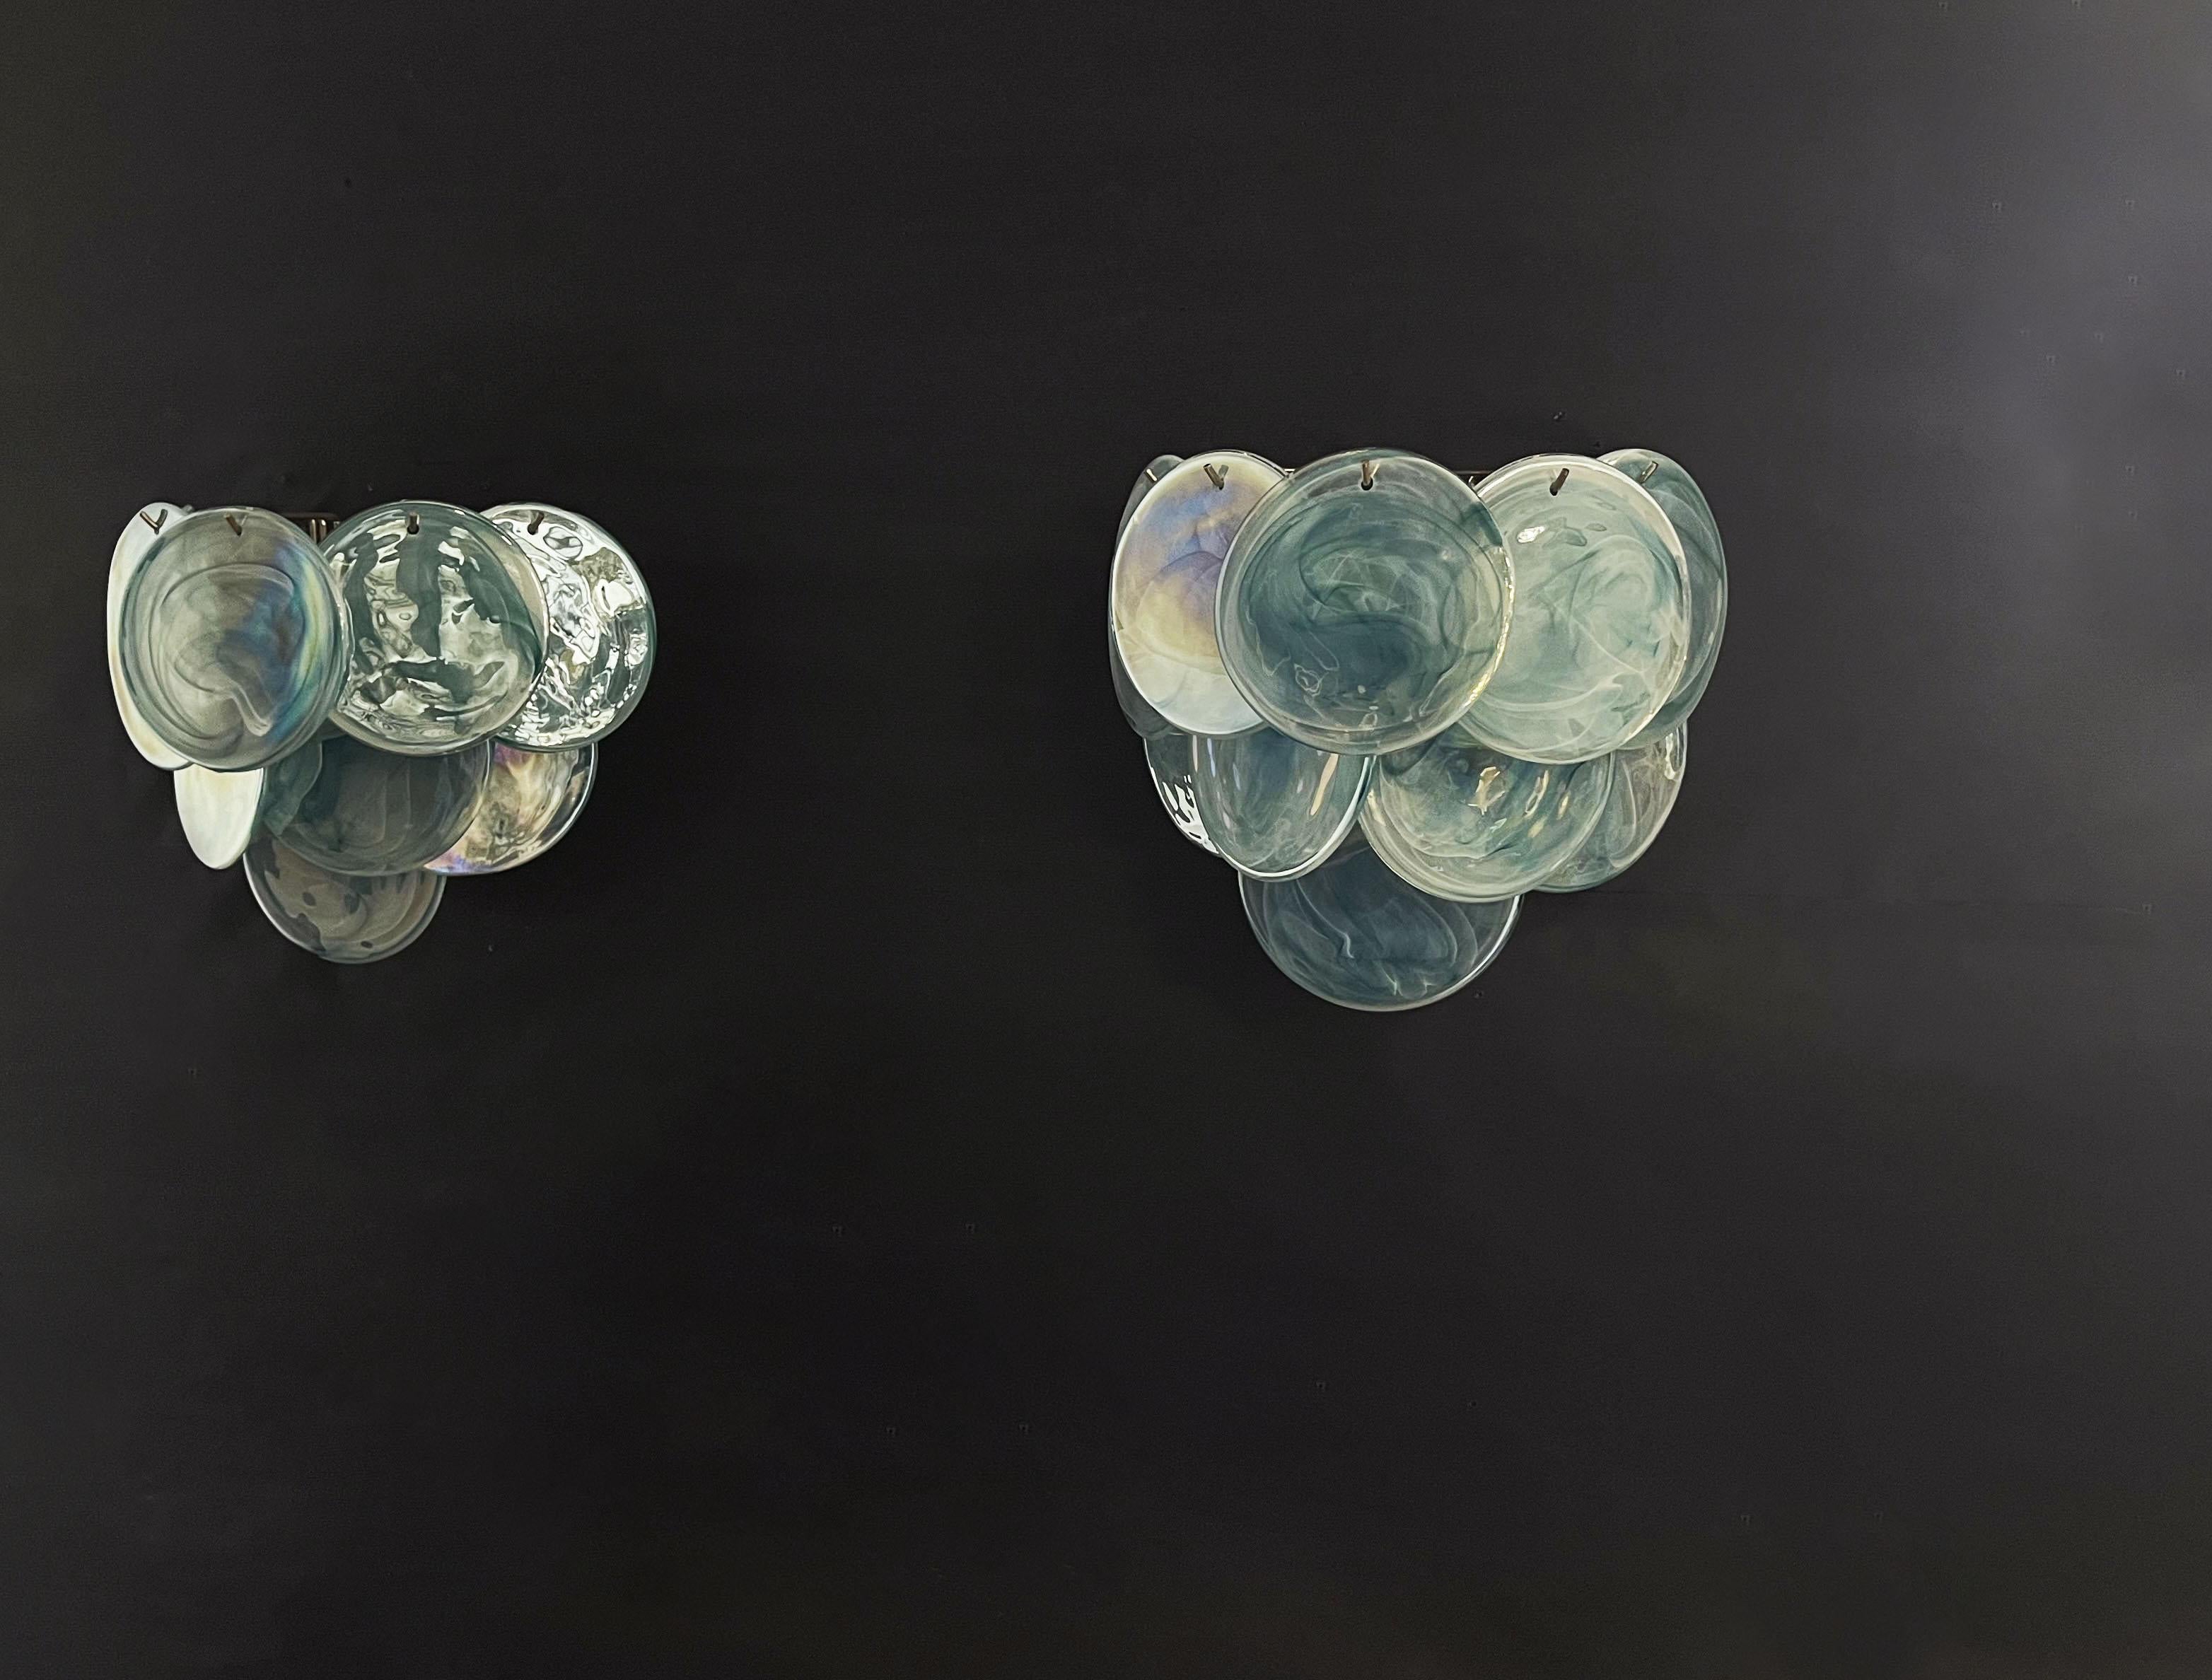 Pair of vintage Italian Murano appliques in Vistosi style. Wall lights have 10 glass for each, iridescent alabaster blue discs. The glasses are now unavailable, they have the particularity of reflecting a multiplicity of colors, which makes the